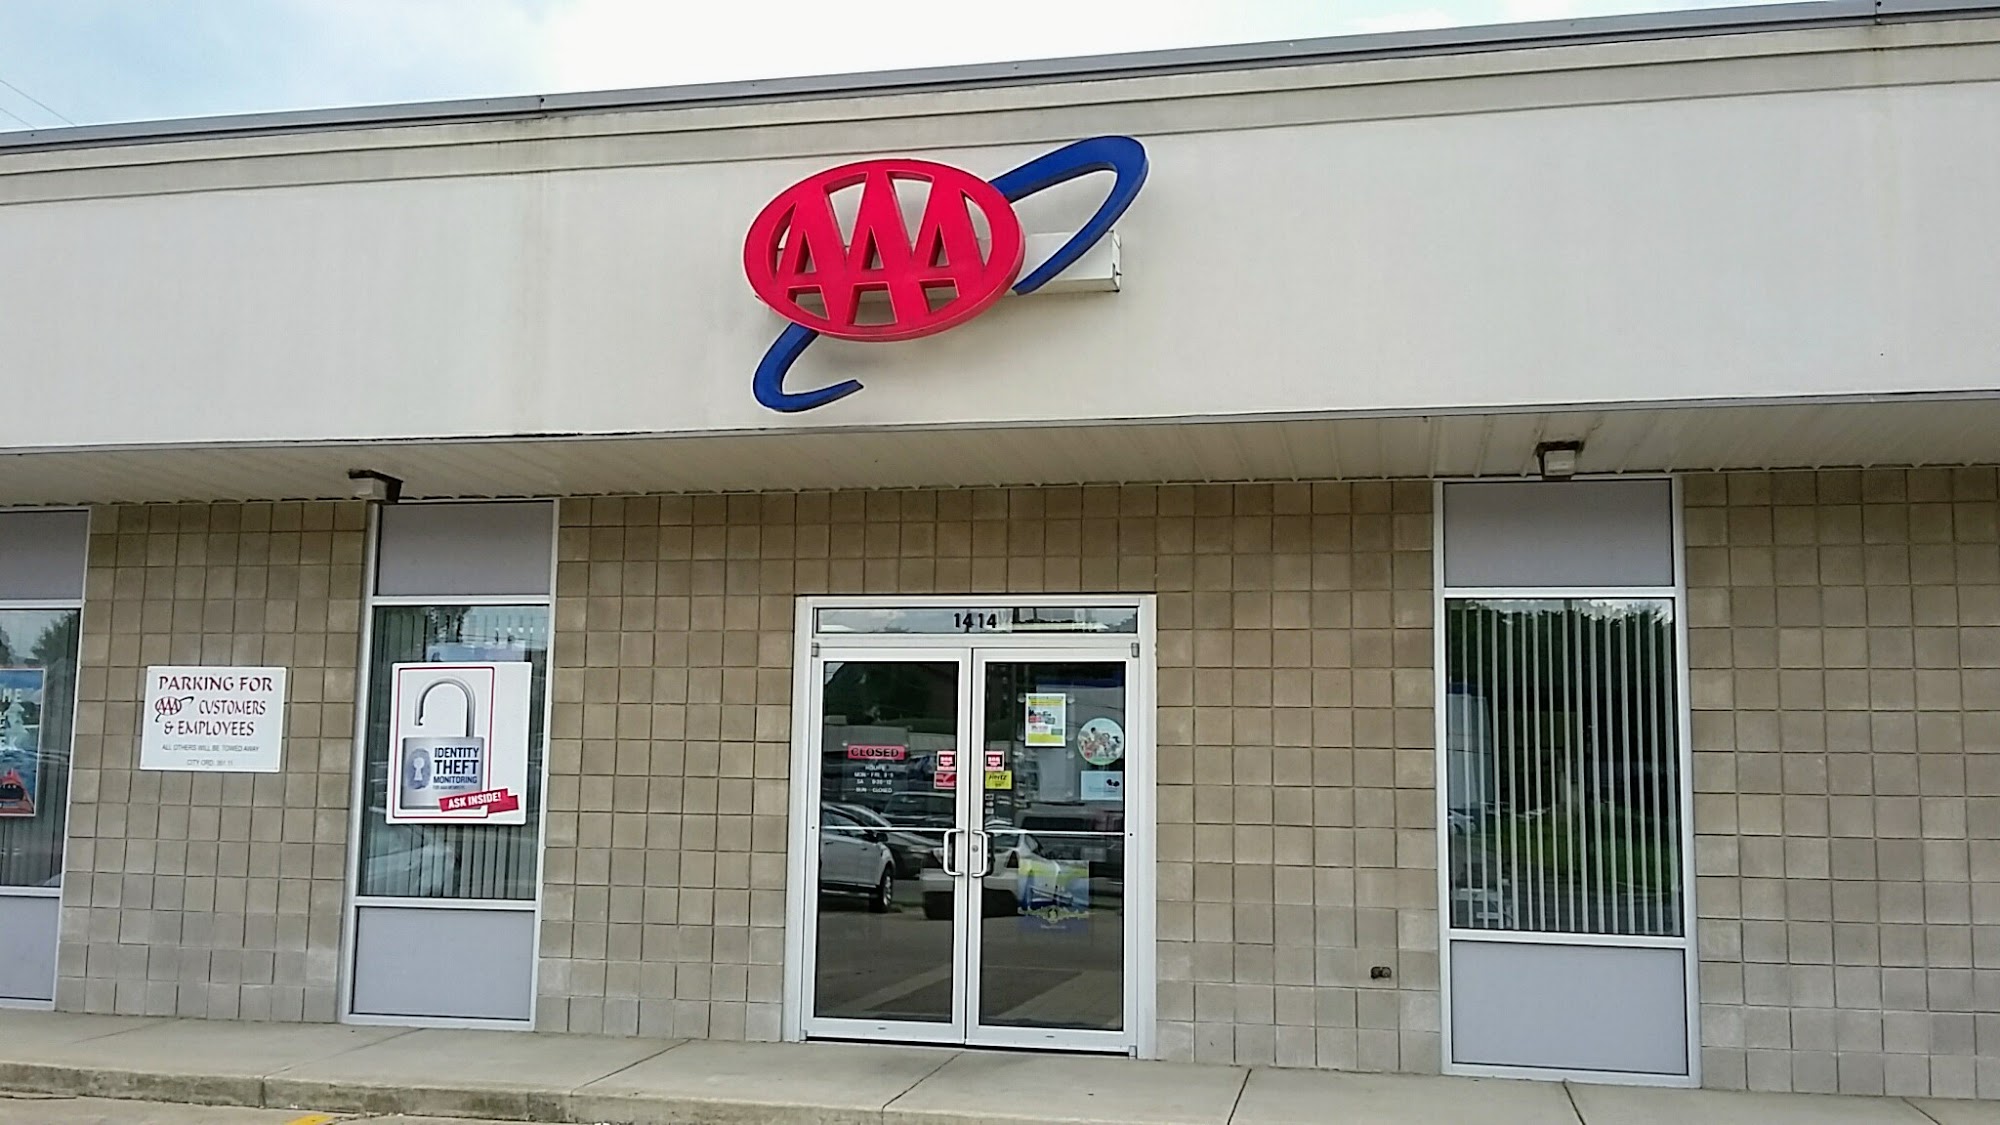 AAA Portsmouth Insurance and Member Services